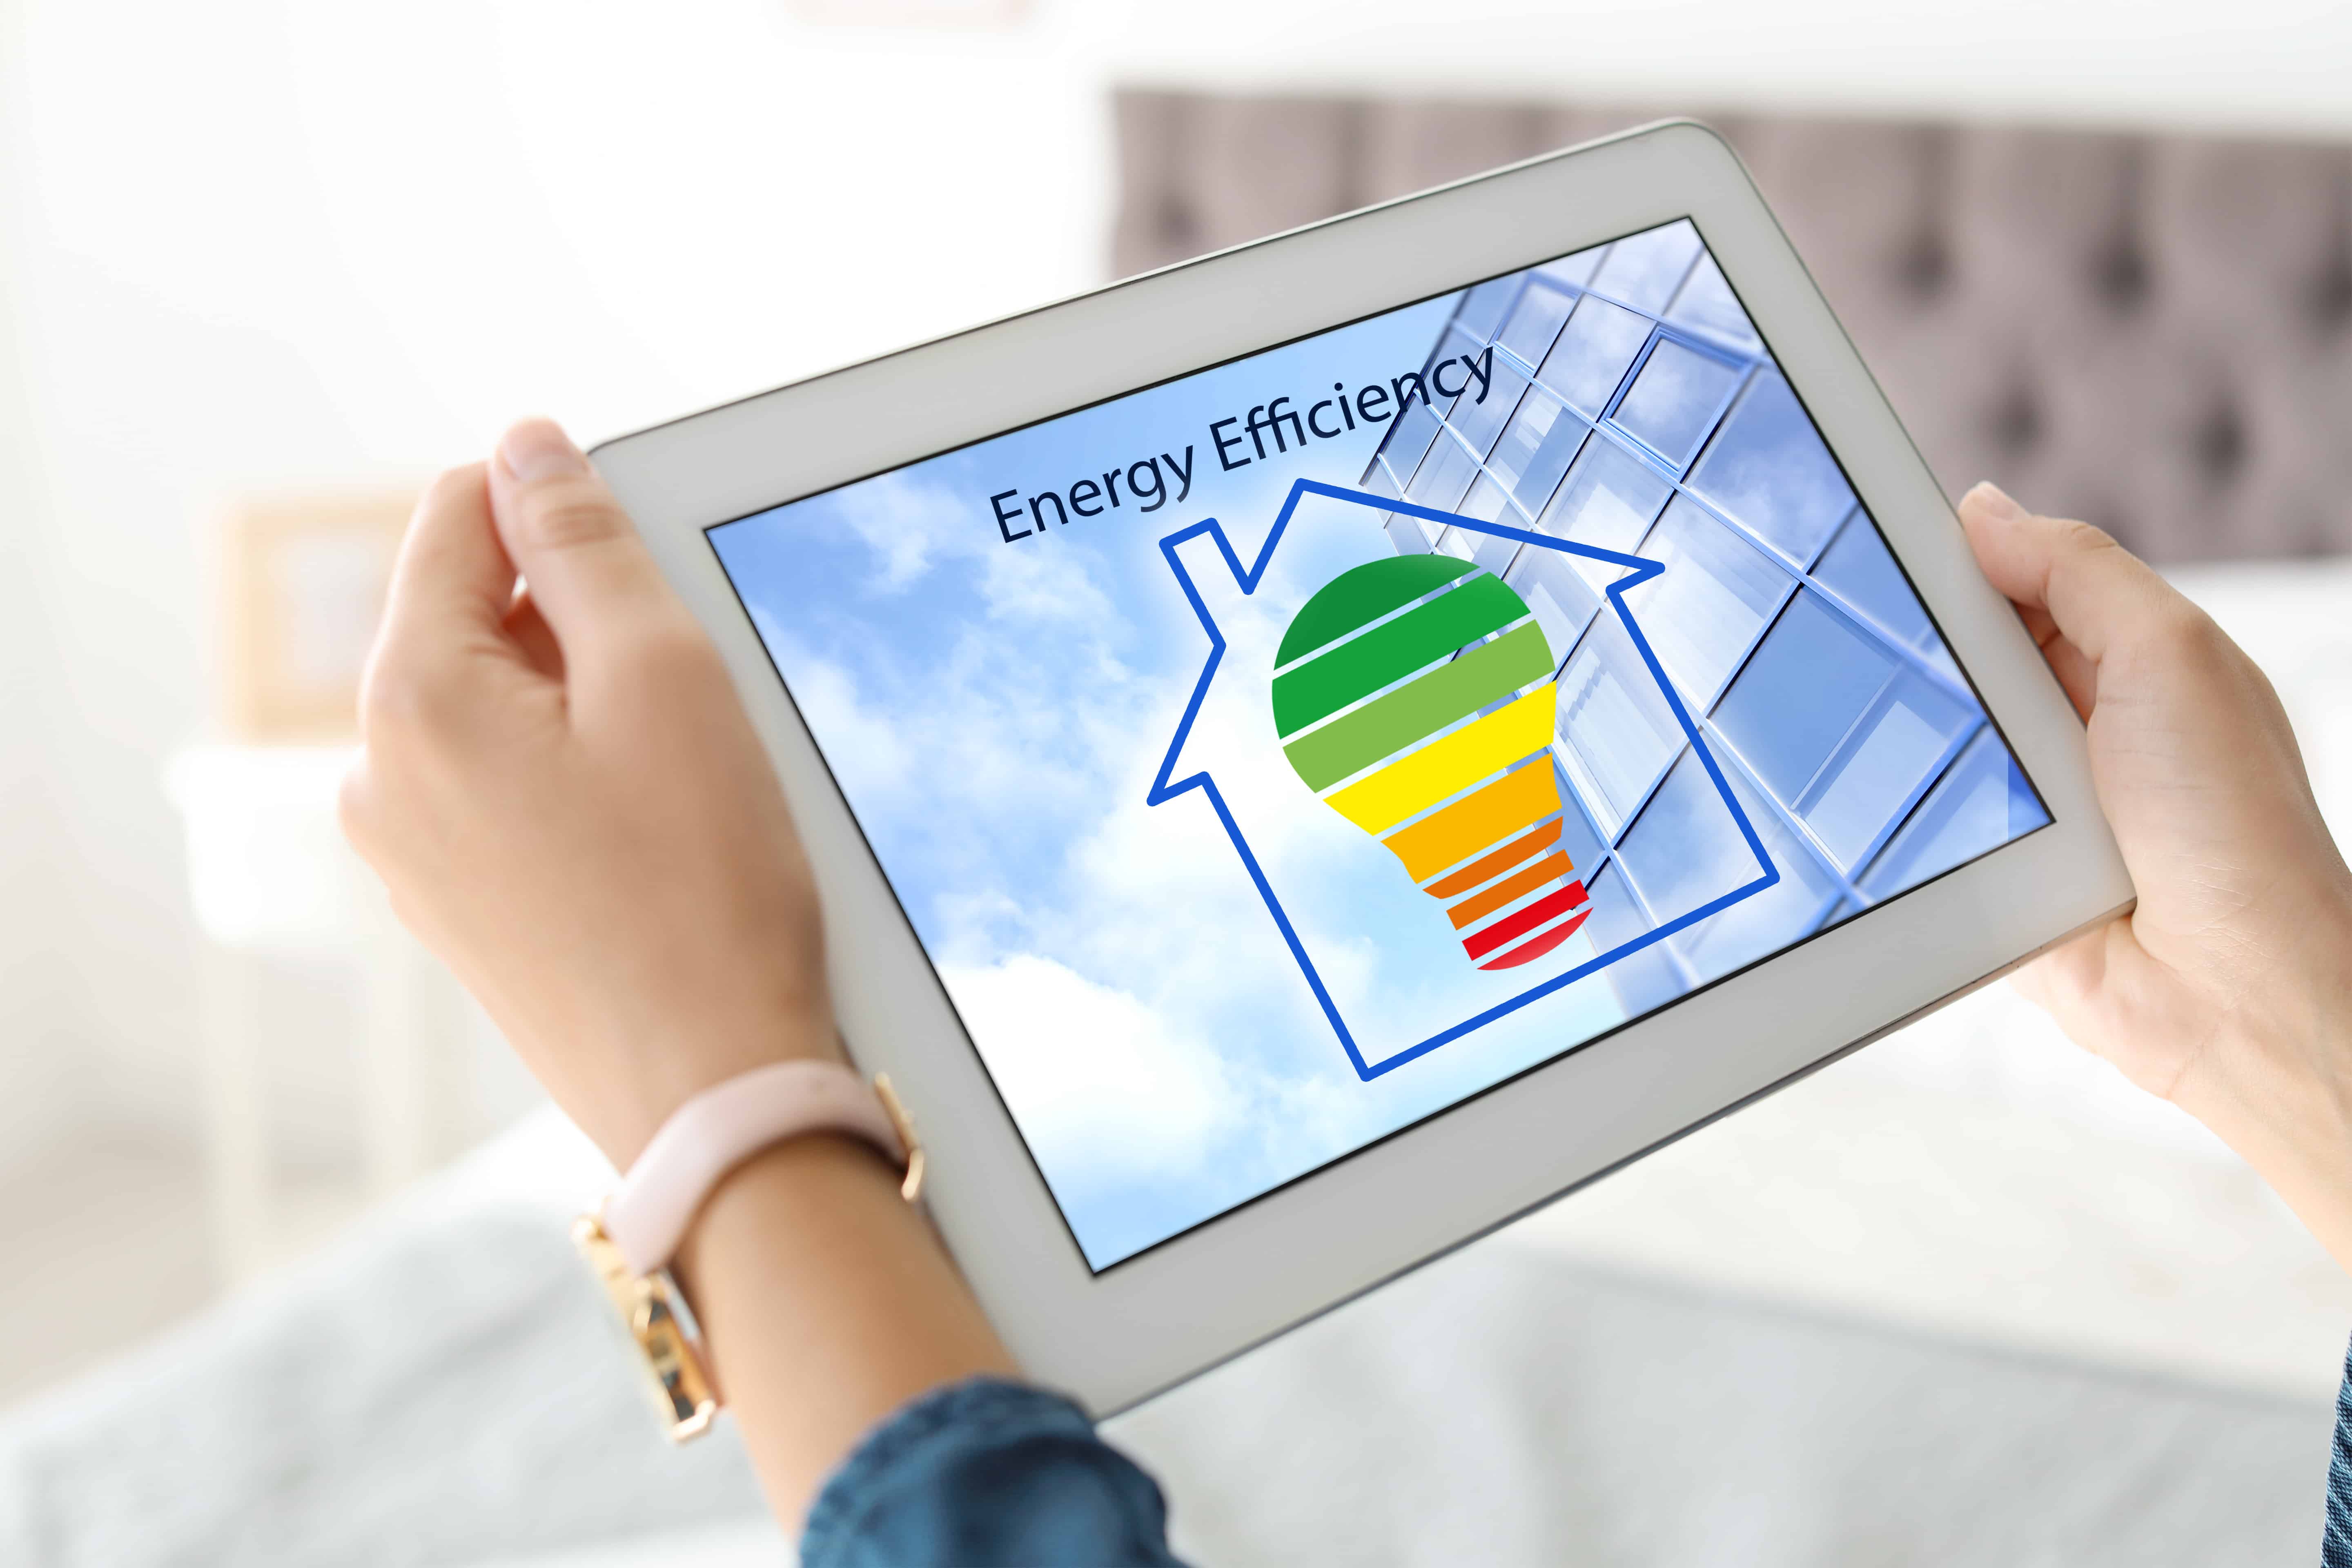 10 Facts About the HERS Index (Energy Efficiency)